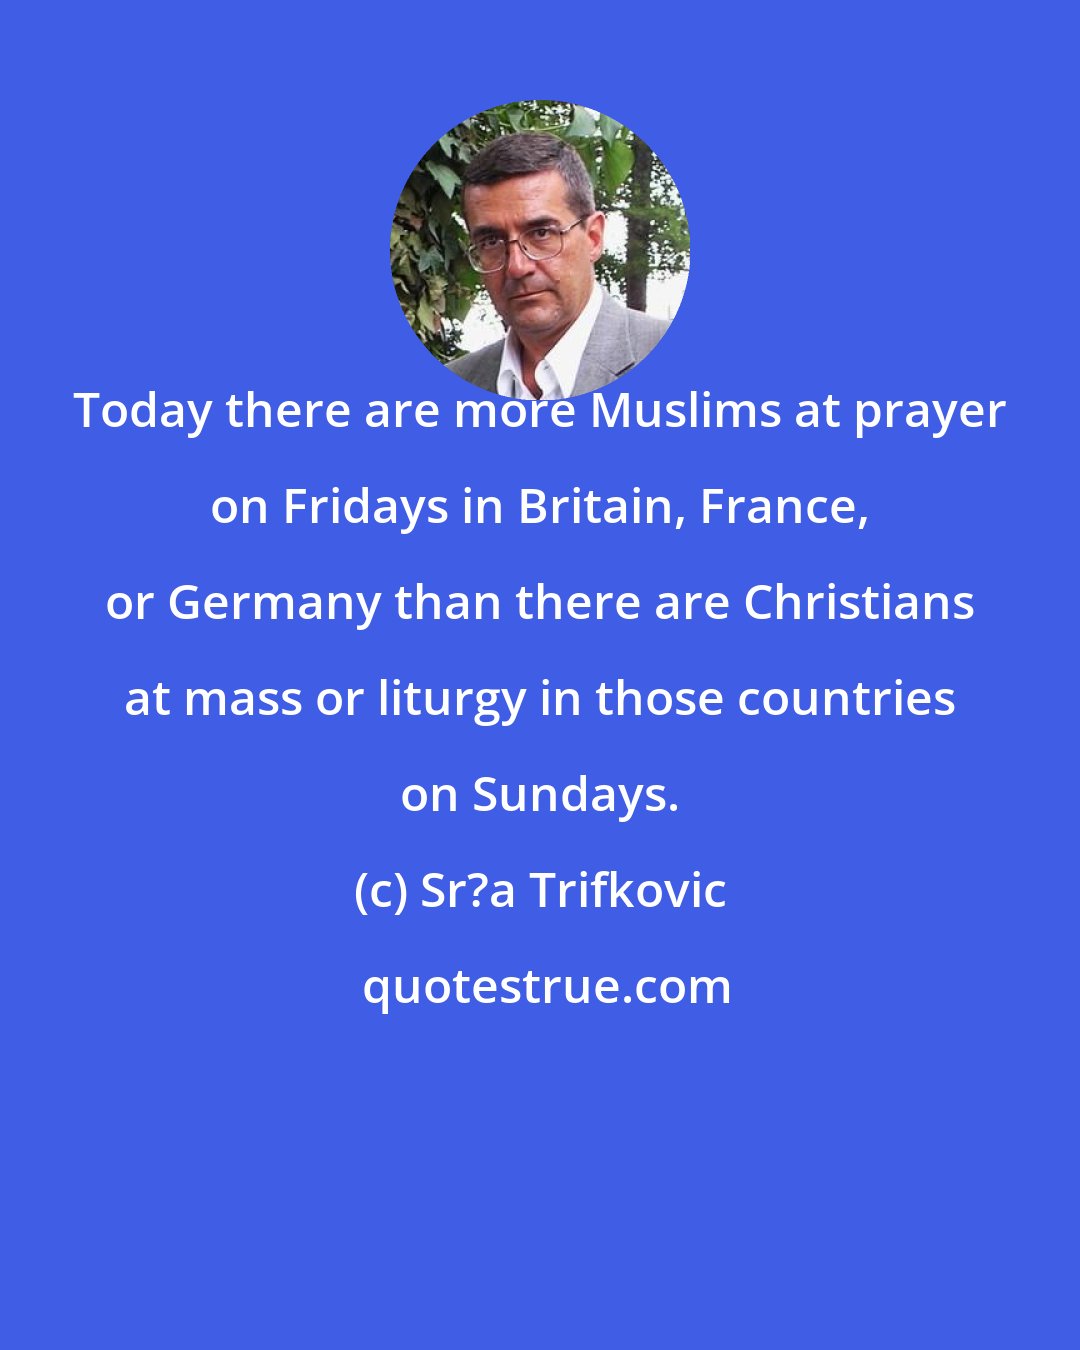 Sr?a Trifkovic: Today there are more Muslims at prayer on Fridays in Britain, France, or Germany than there are Christians at mass or liturgy in those countries on Sundays.